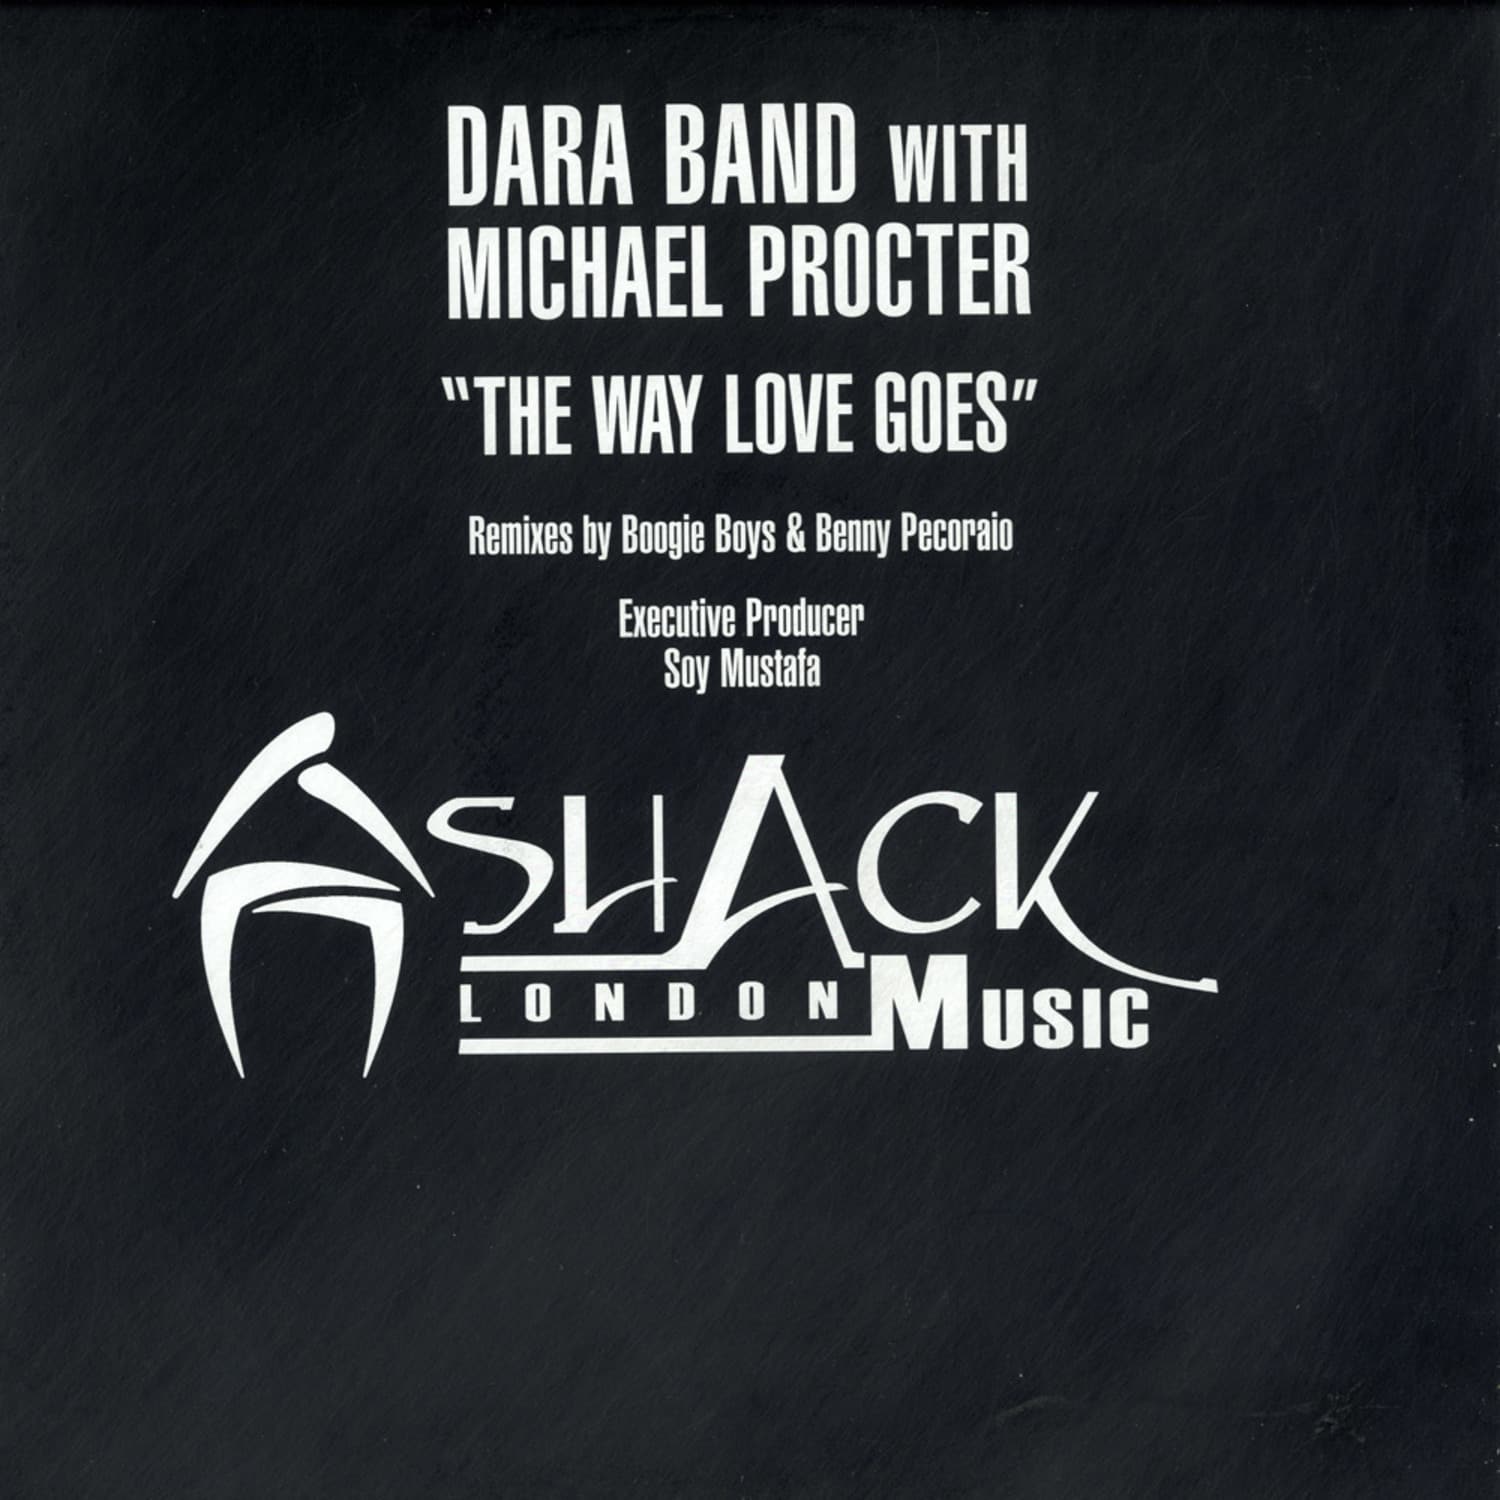 Dara Band with Michael Proctor - THE WAY LOVE GOES